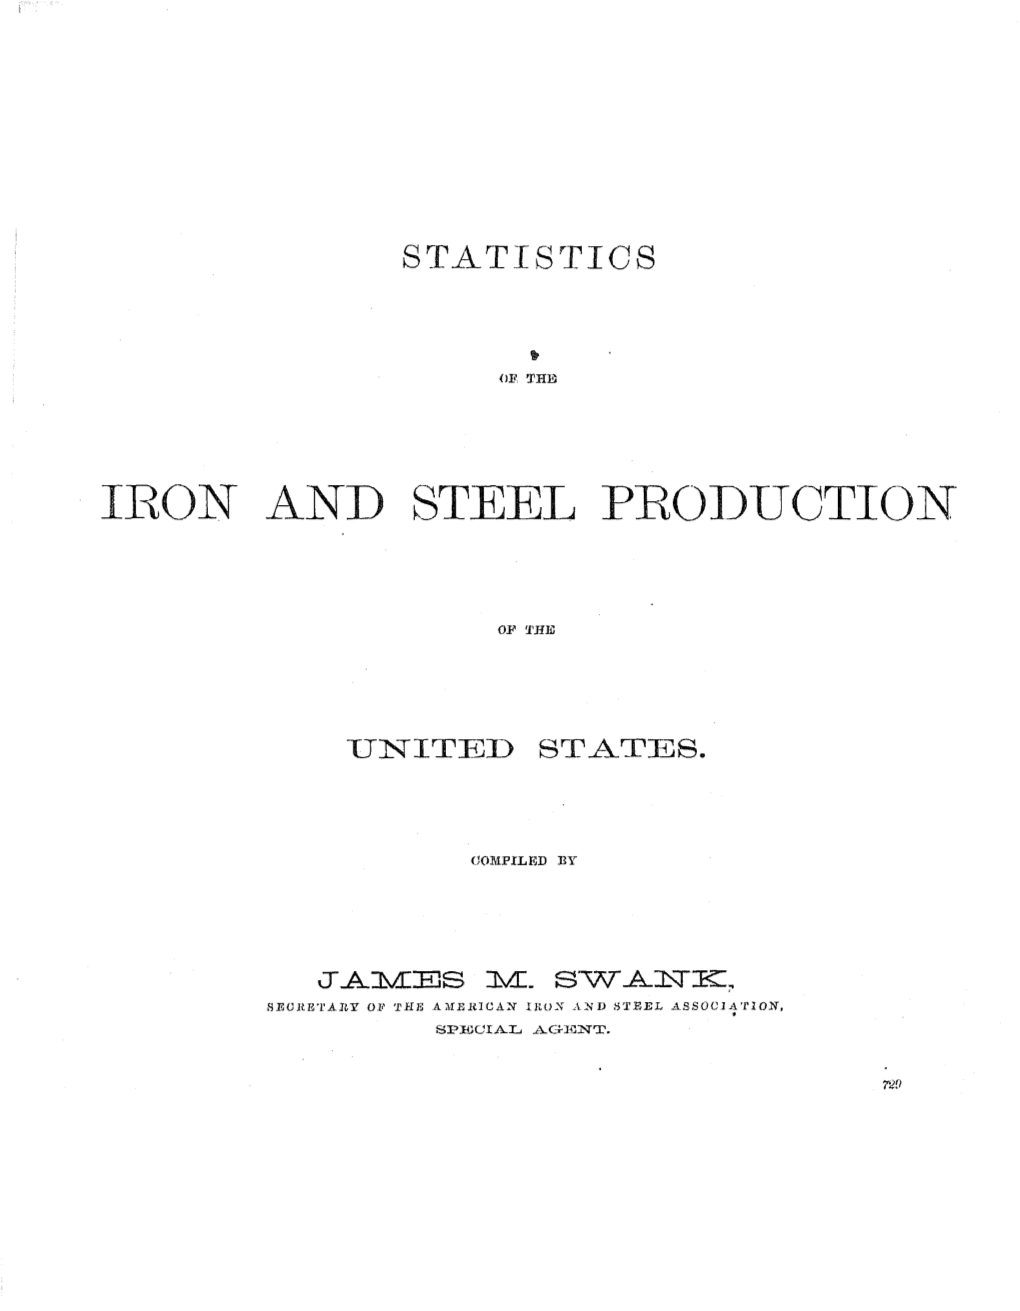 1880 Census: Volume 2. Report on the Manufactures of the United